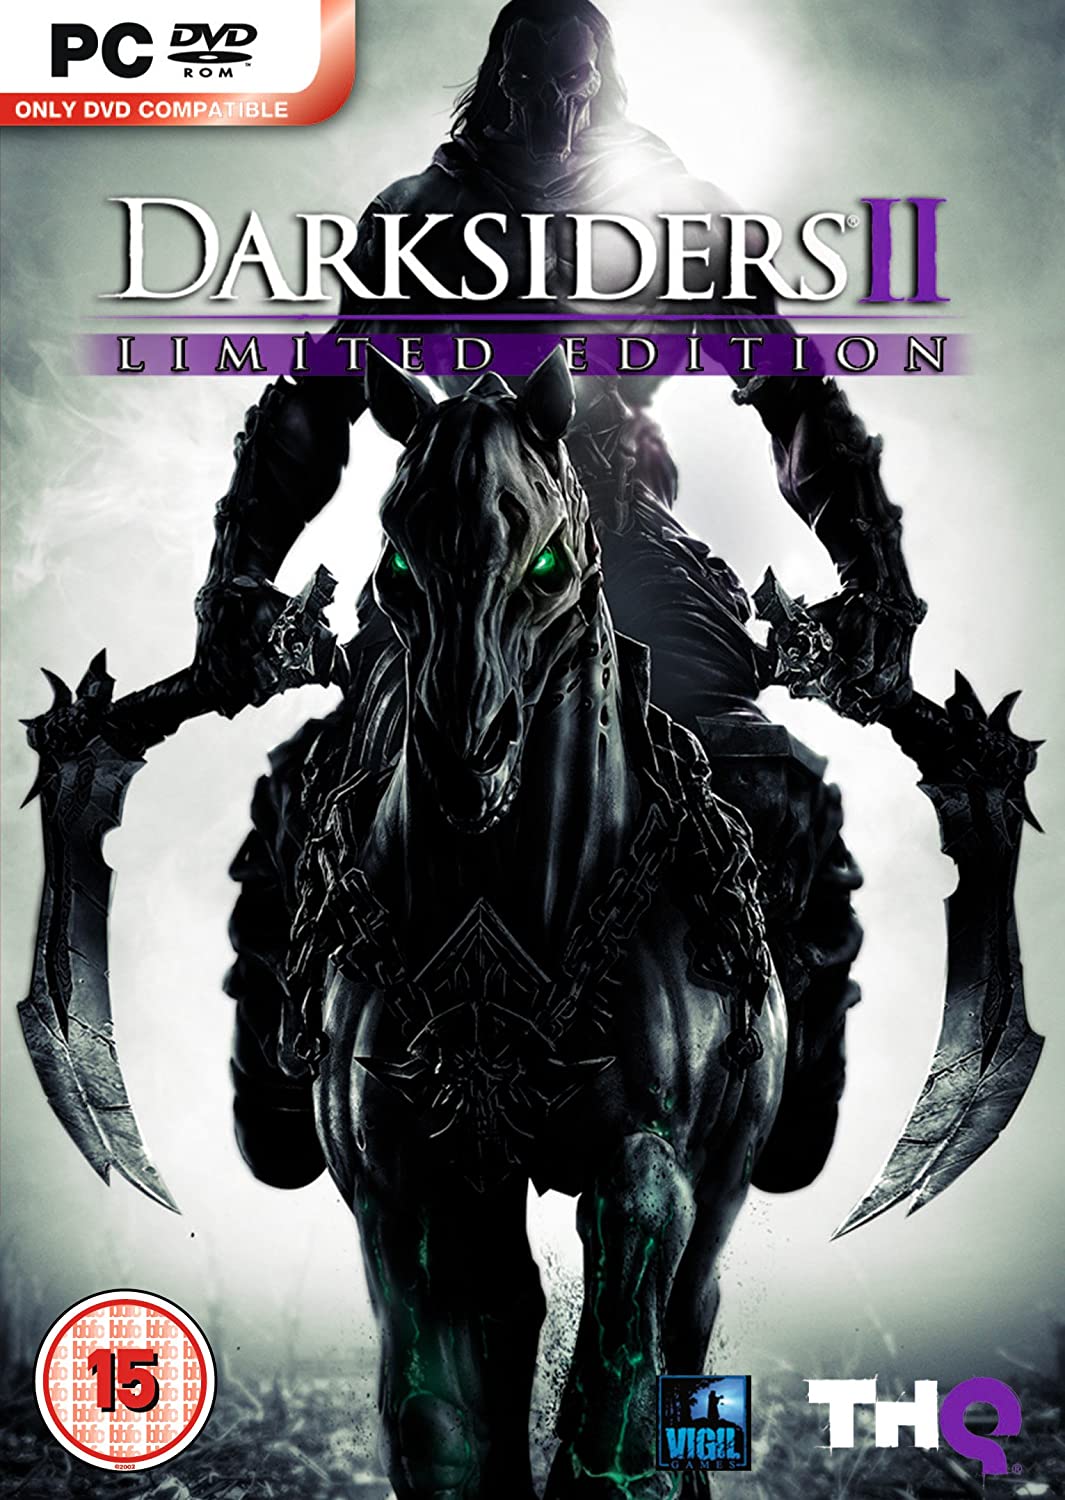 Darksiders II - Limited Edition (PC) [PC]